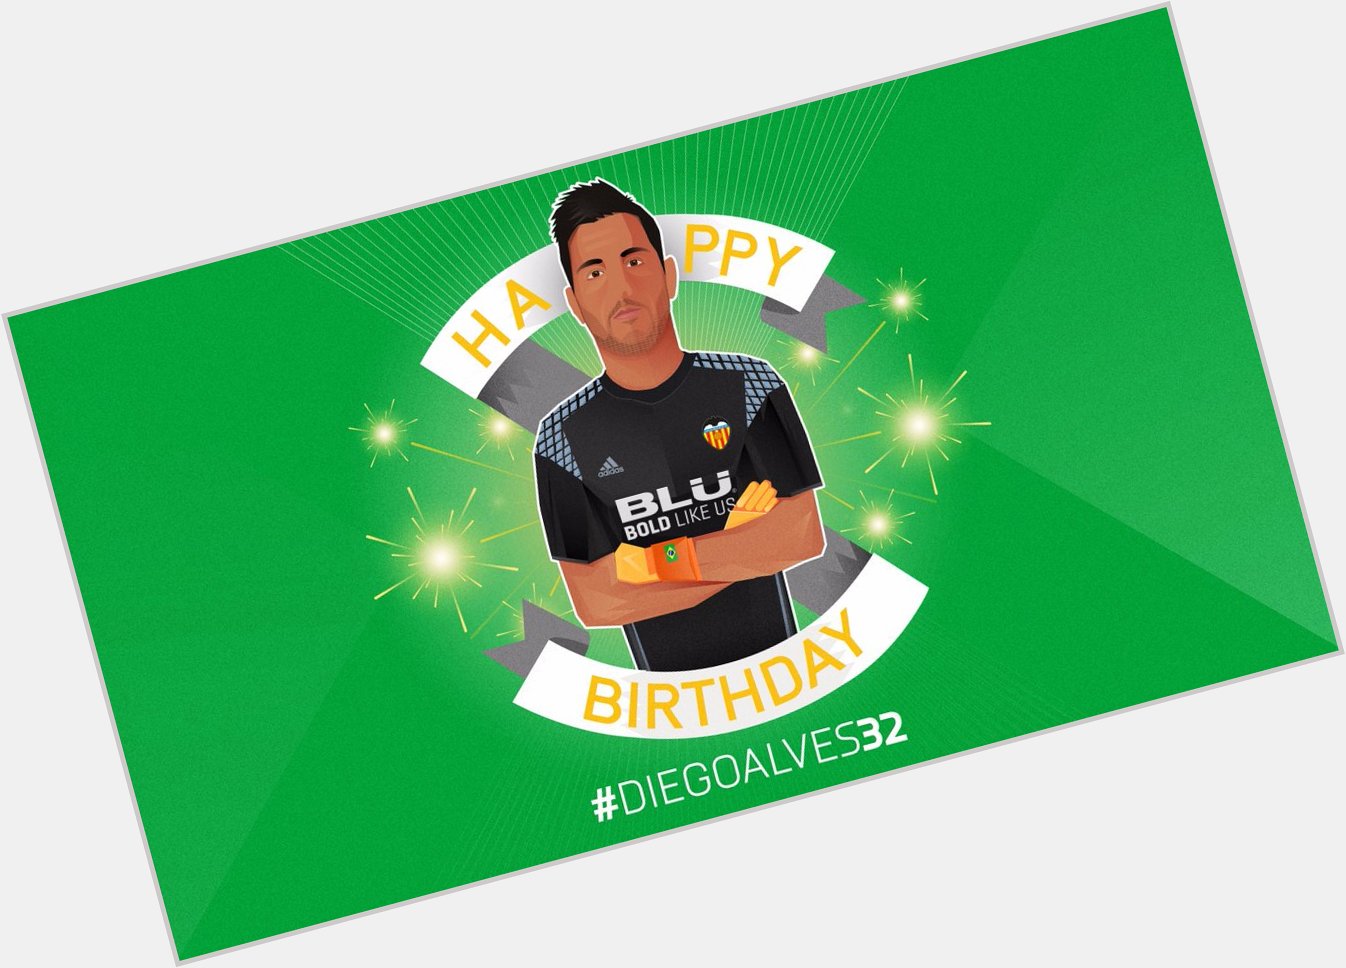  Today is the birthday of a Valencianista player. Many happy returns Diego Alves! 